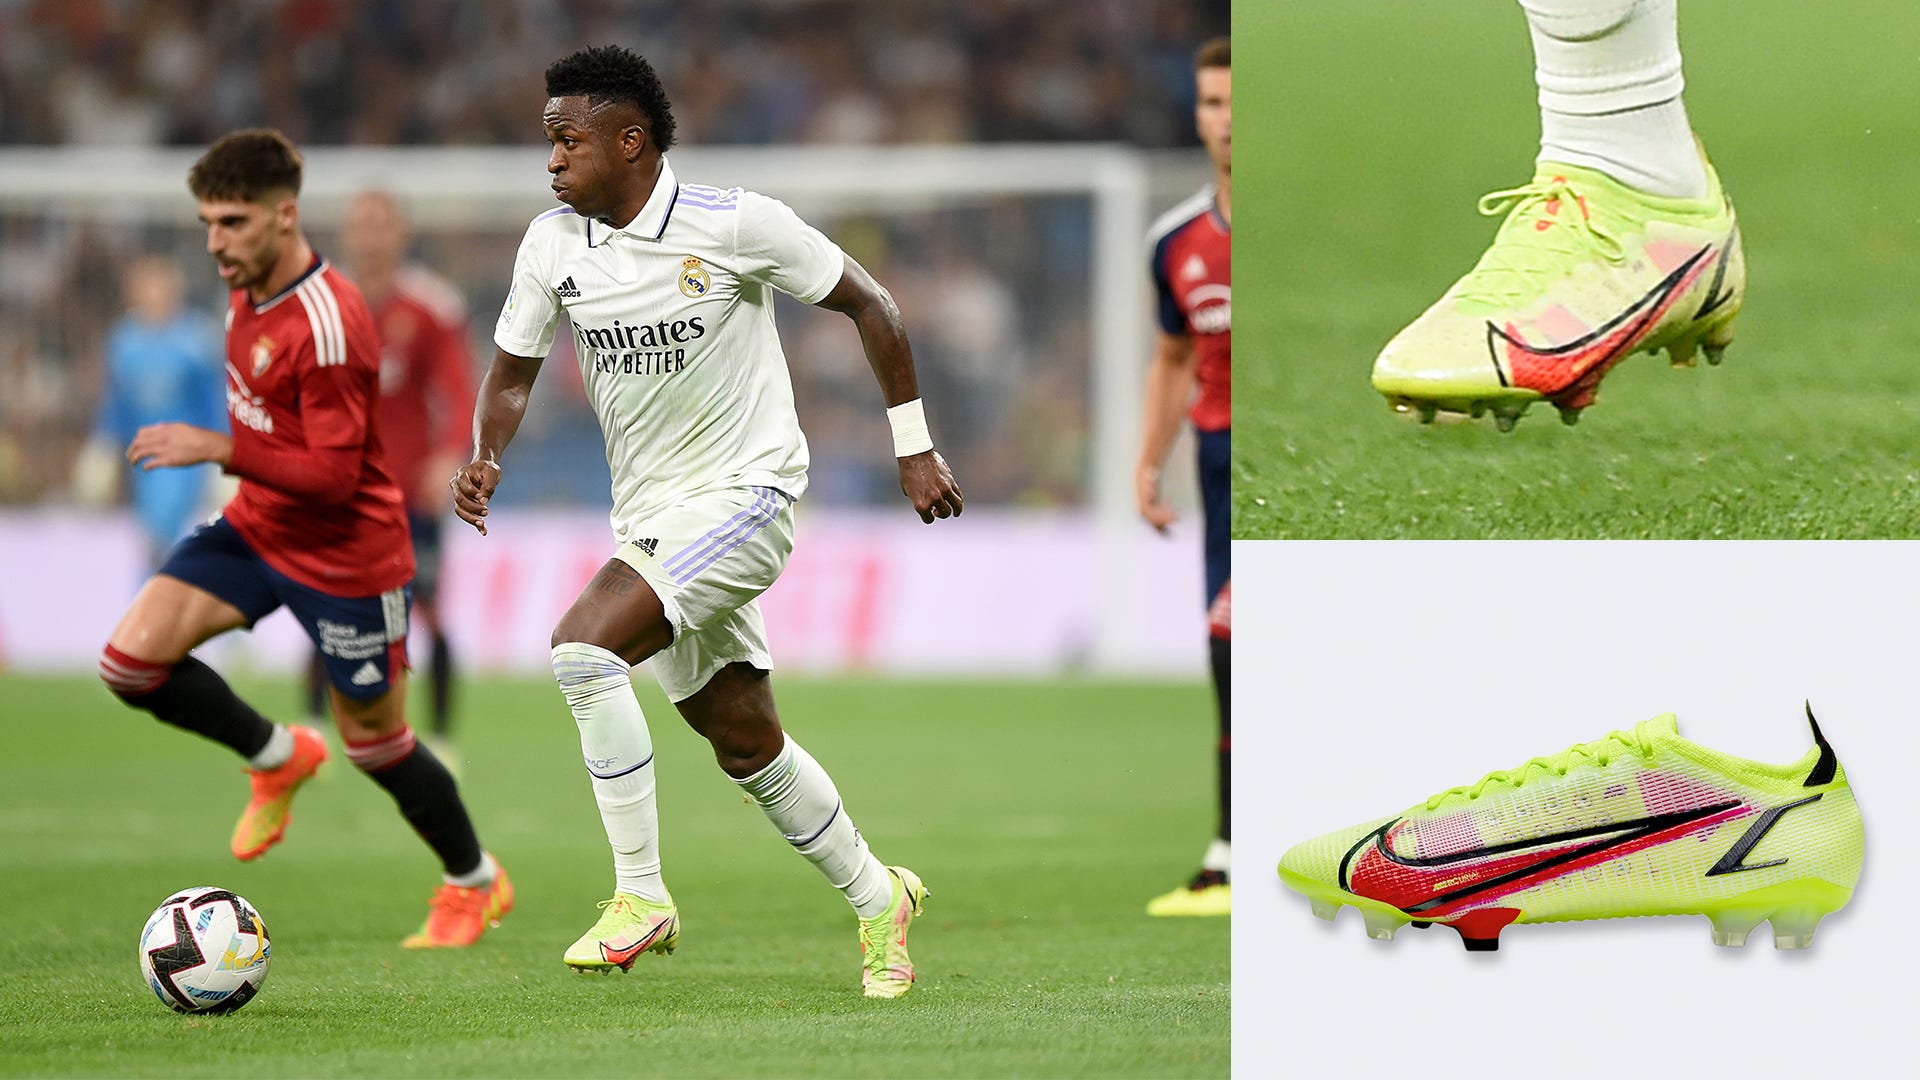 The most popular football boots worn by today's players: What do Messi, Benzema, Haaland, Salah wear? | Goal.com UK